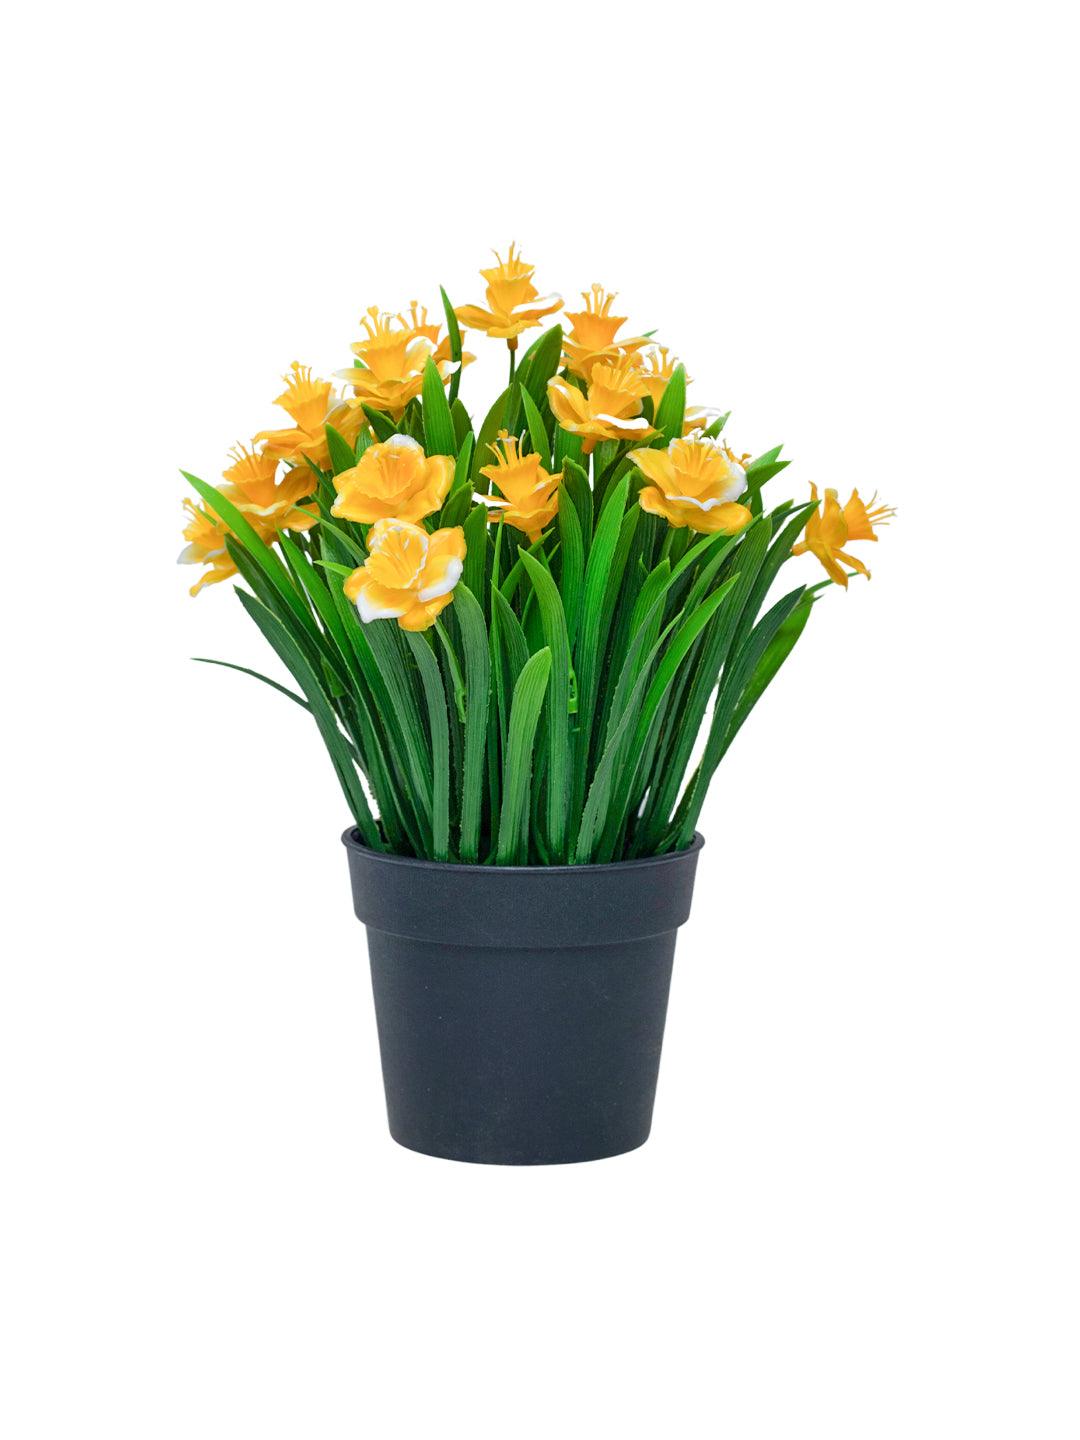 Yellow Artificial Flower With Pot - MARKET 99